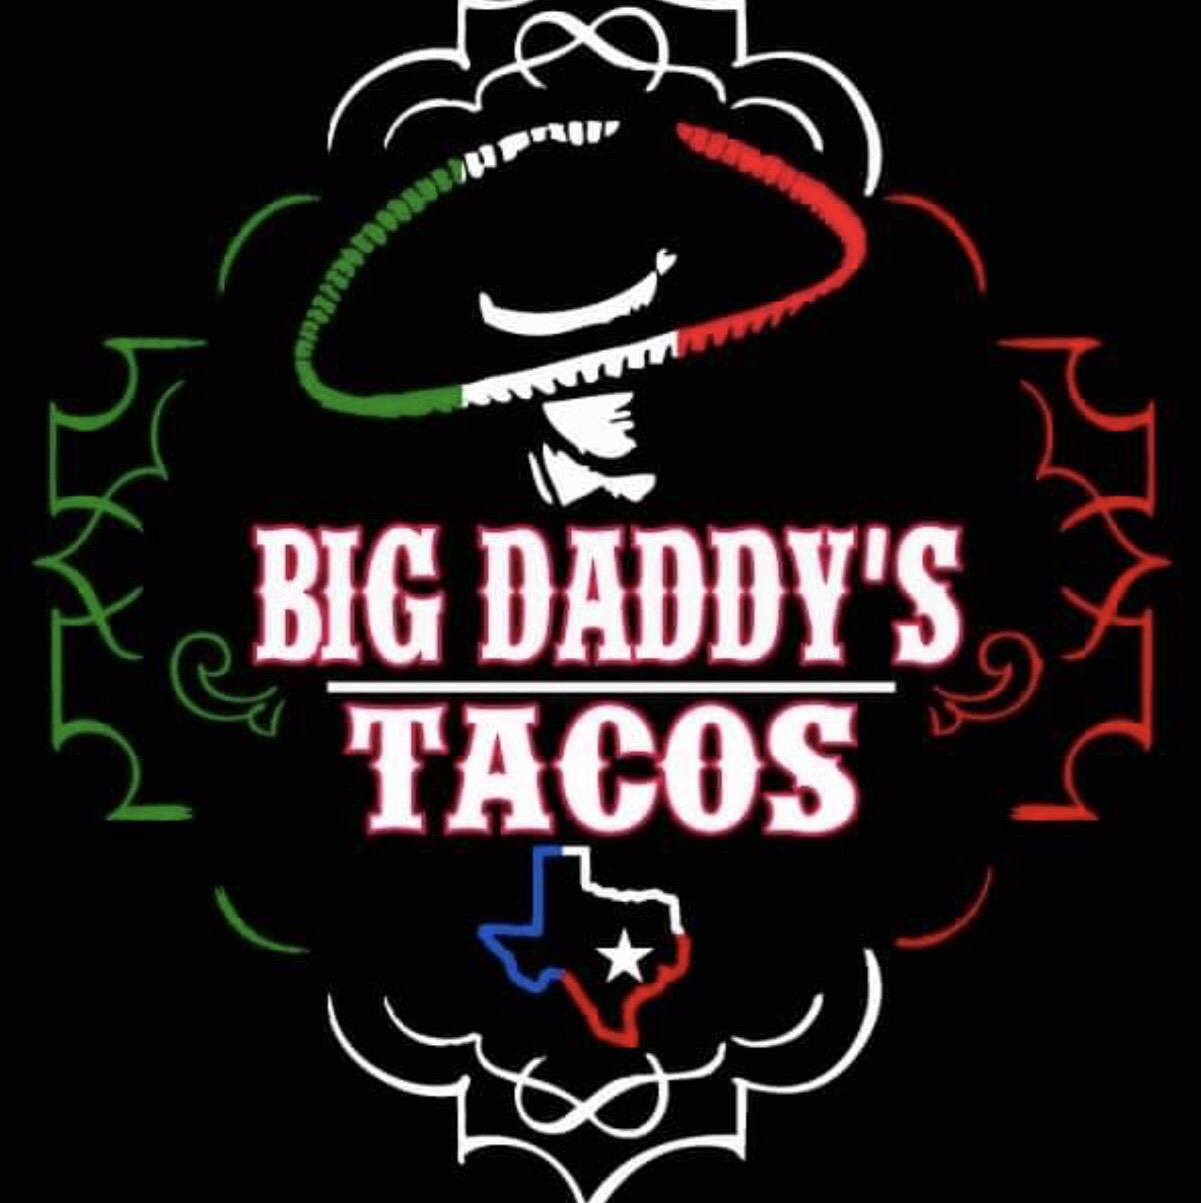  Big Daddy’s Tacos logo with the colors of the Mexican flag, a small Texas logo and a man in a sombrero 